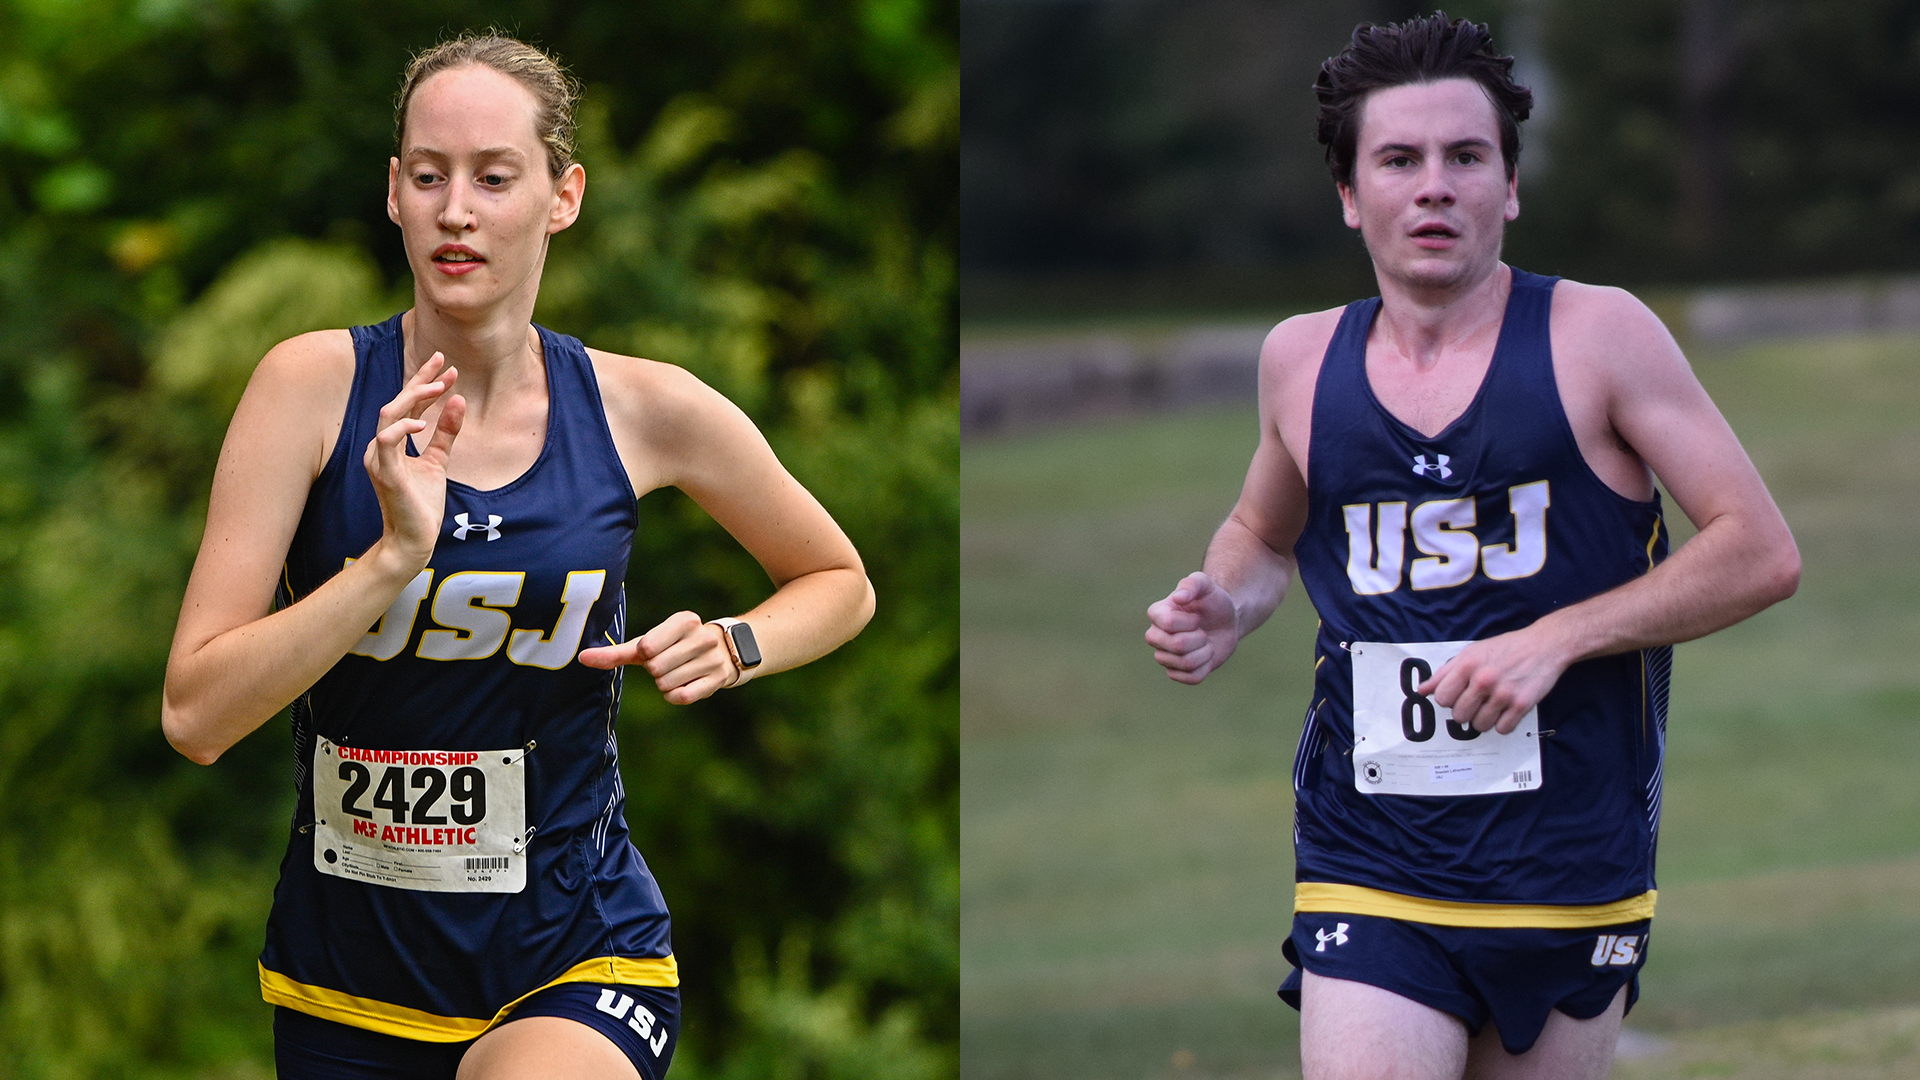 Laframboise, Shores Compete at NCAA Mideast Region Championships